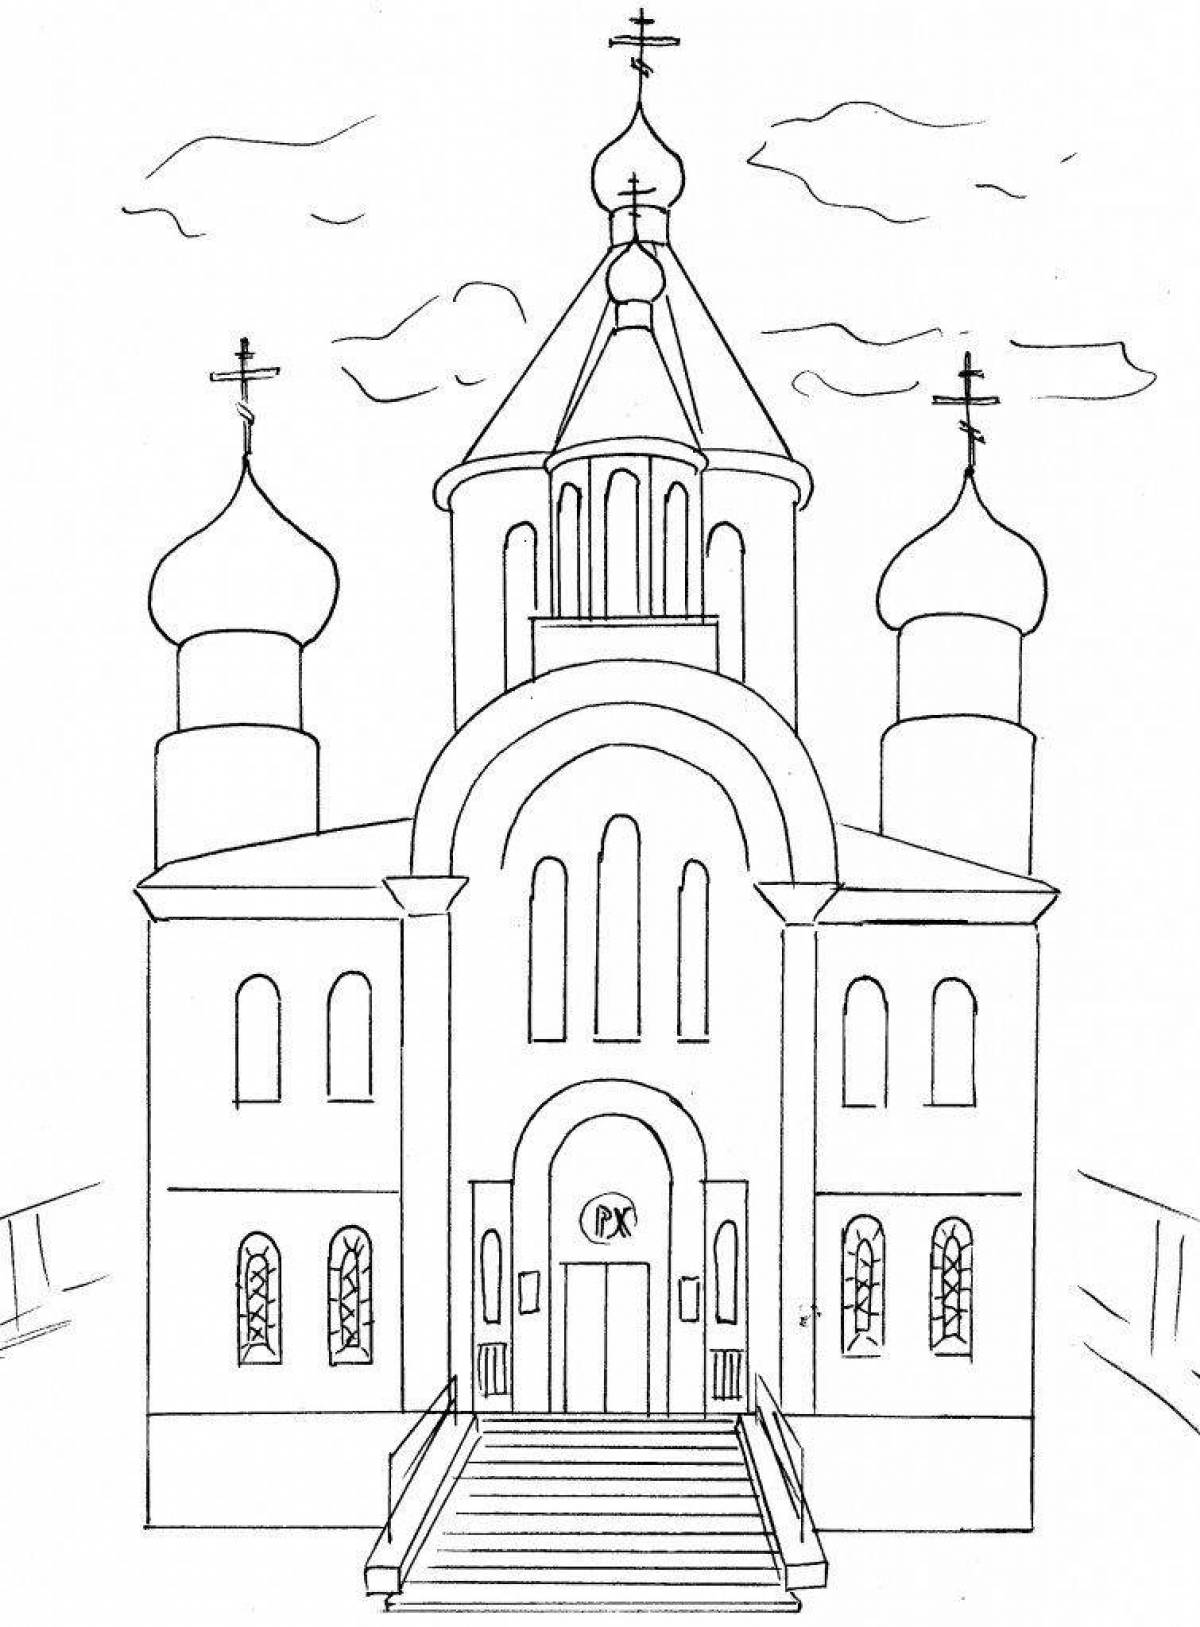 Great temples and churches coloring book for kids